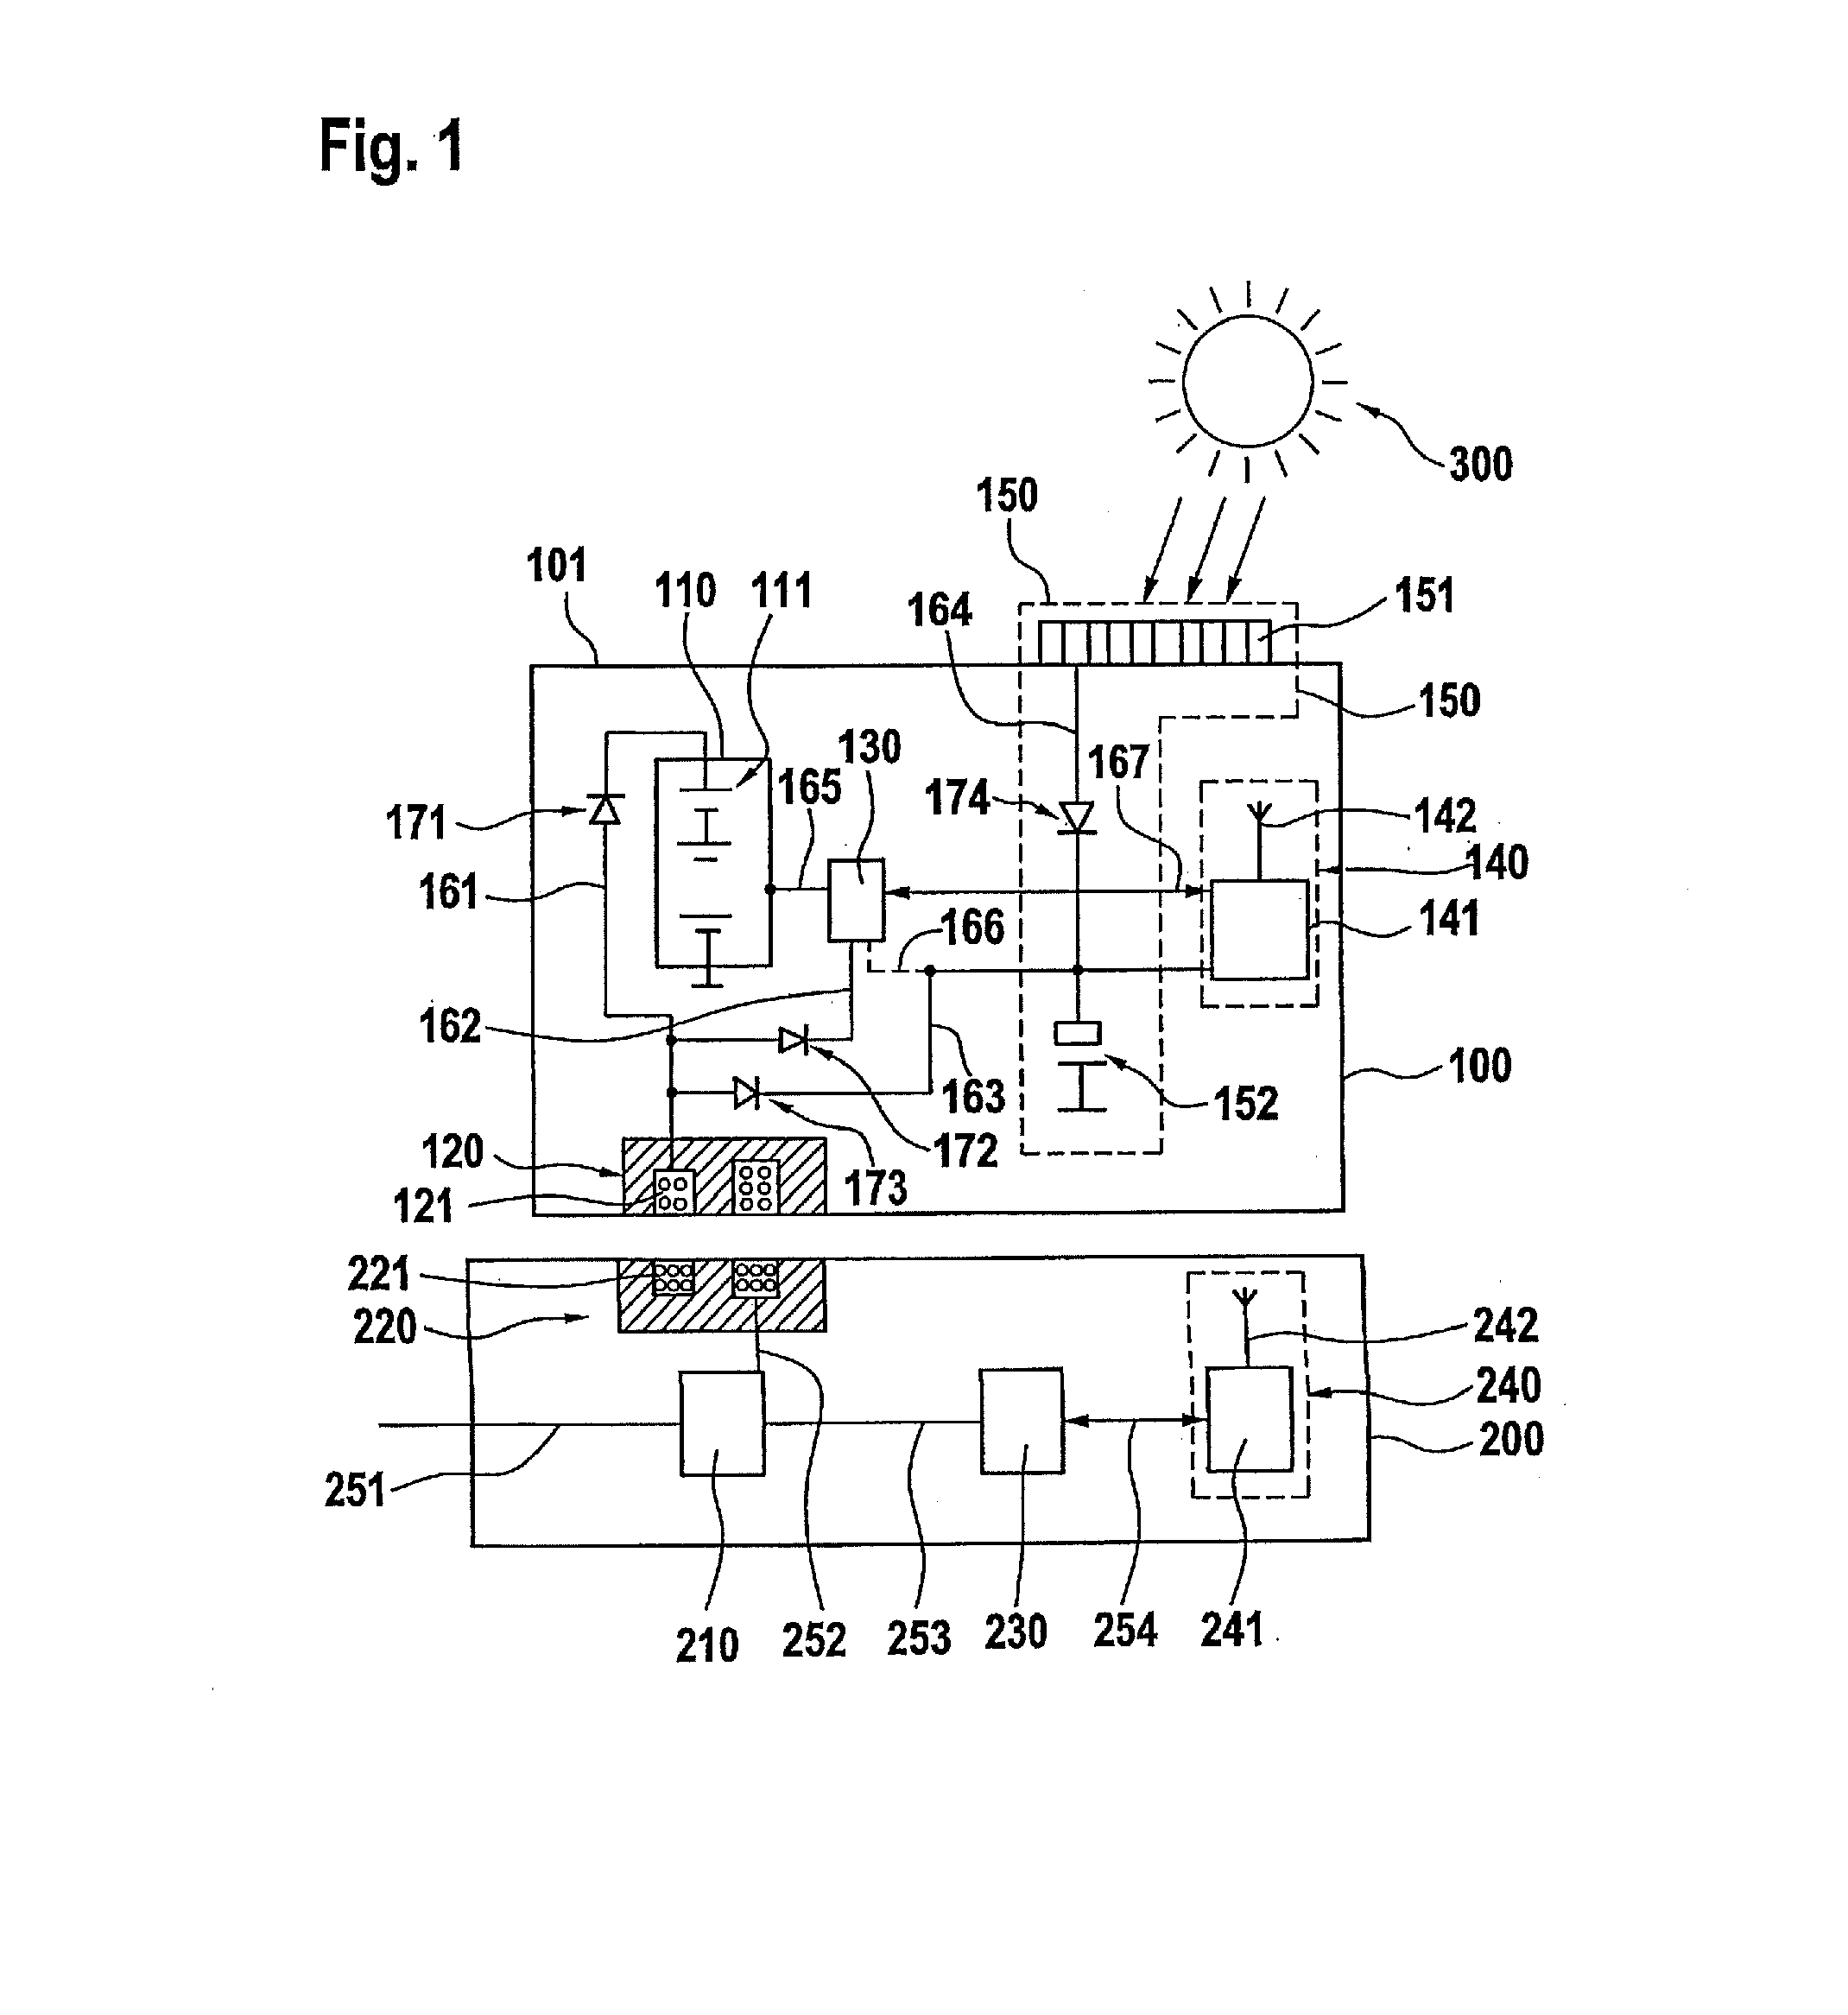 Battery pack having a separate power supply device for a wireless communication device of the battery pack